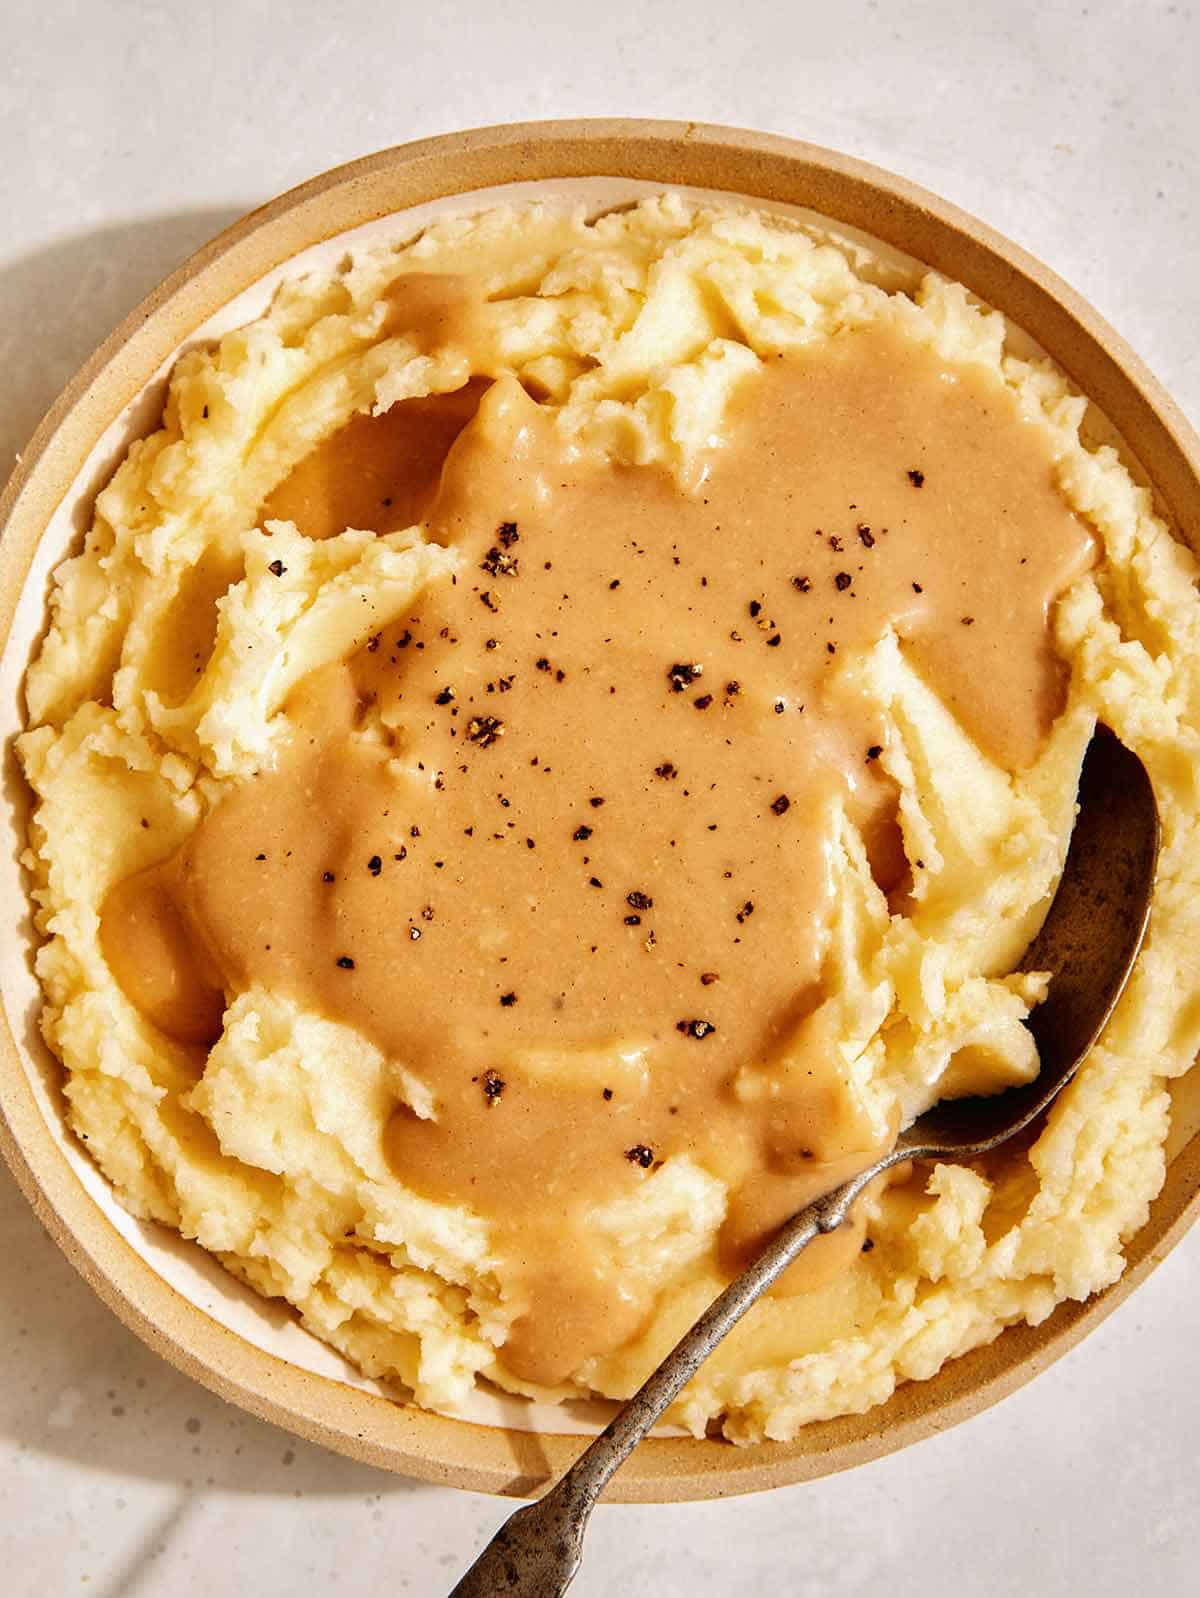 Mashed potatoes with gravy poured over them. 